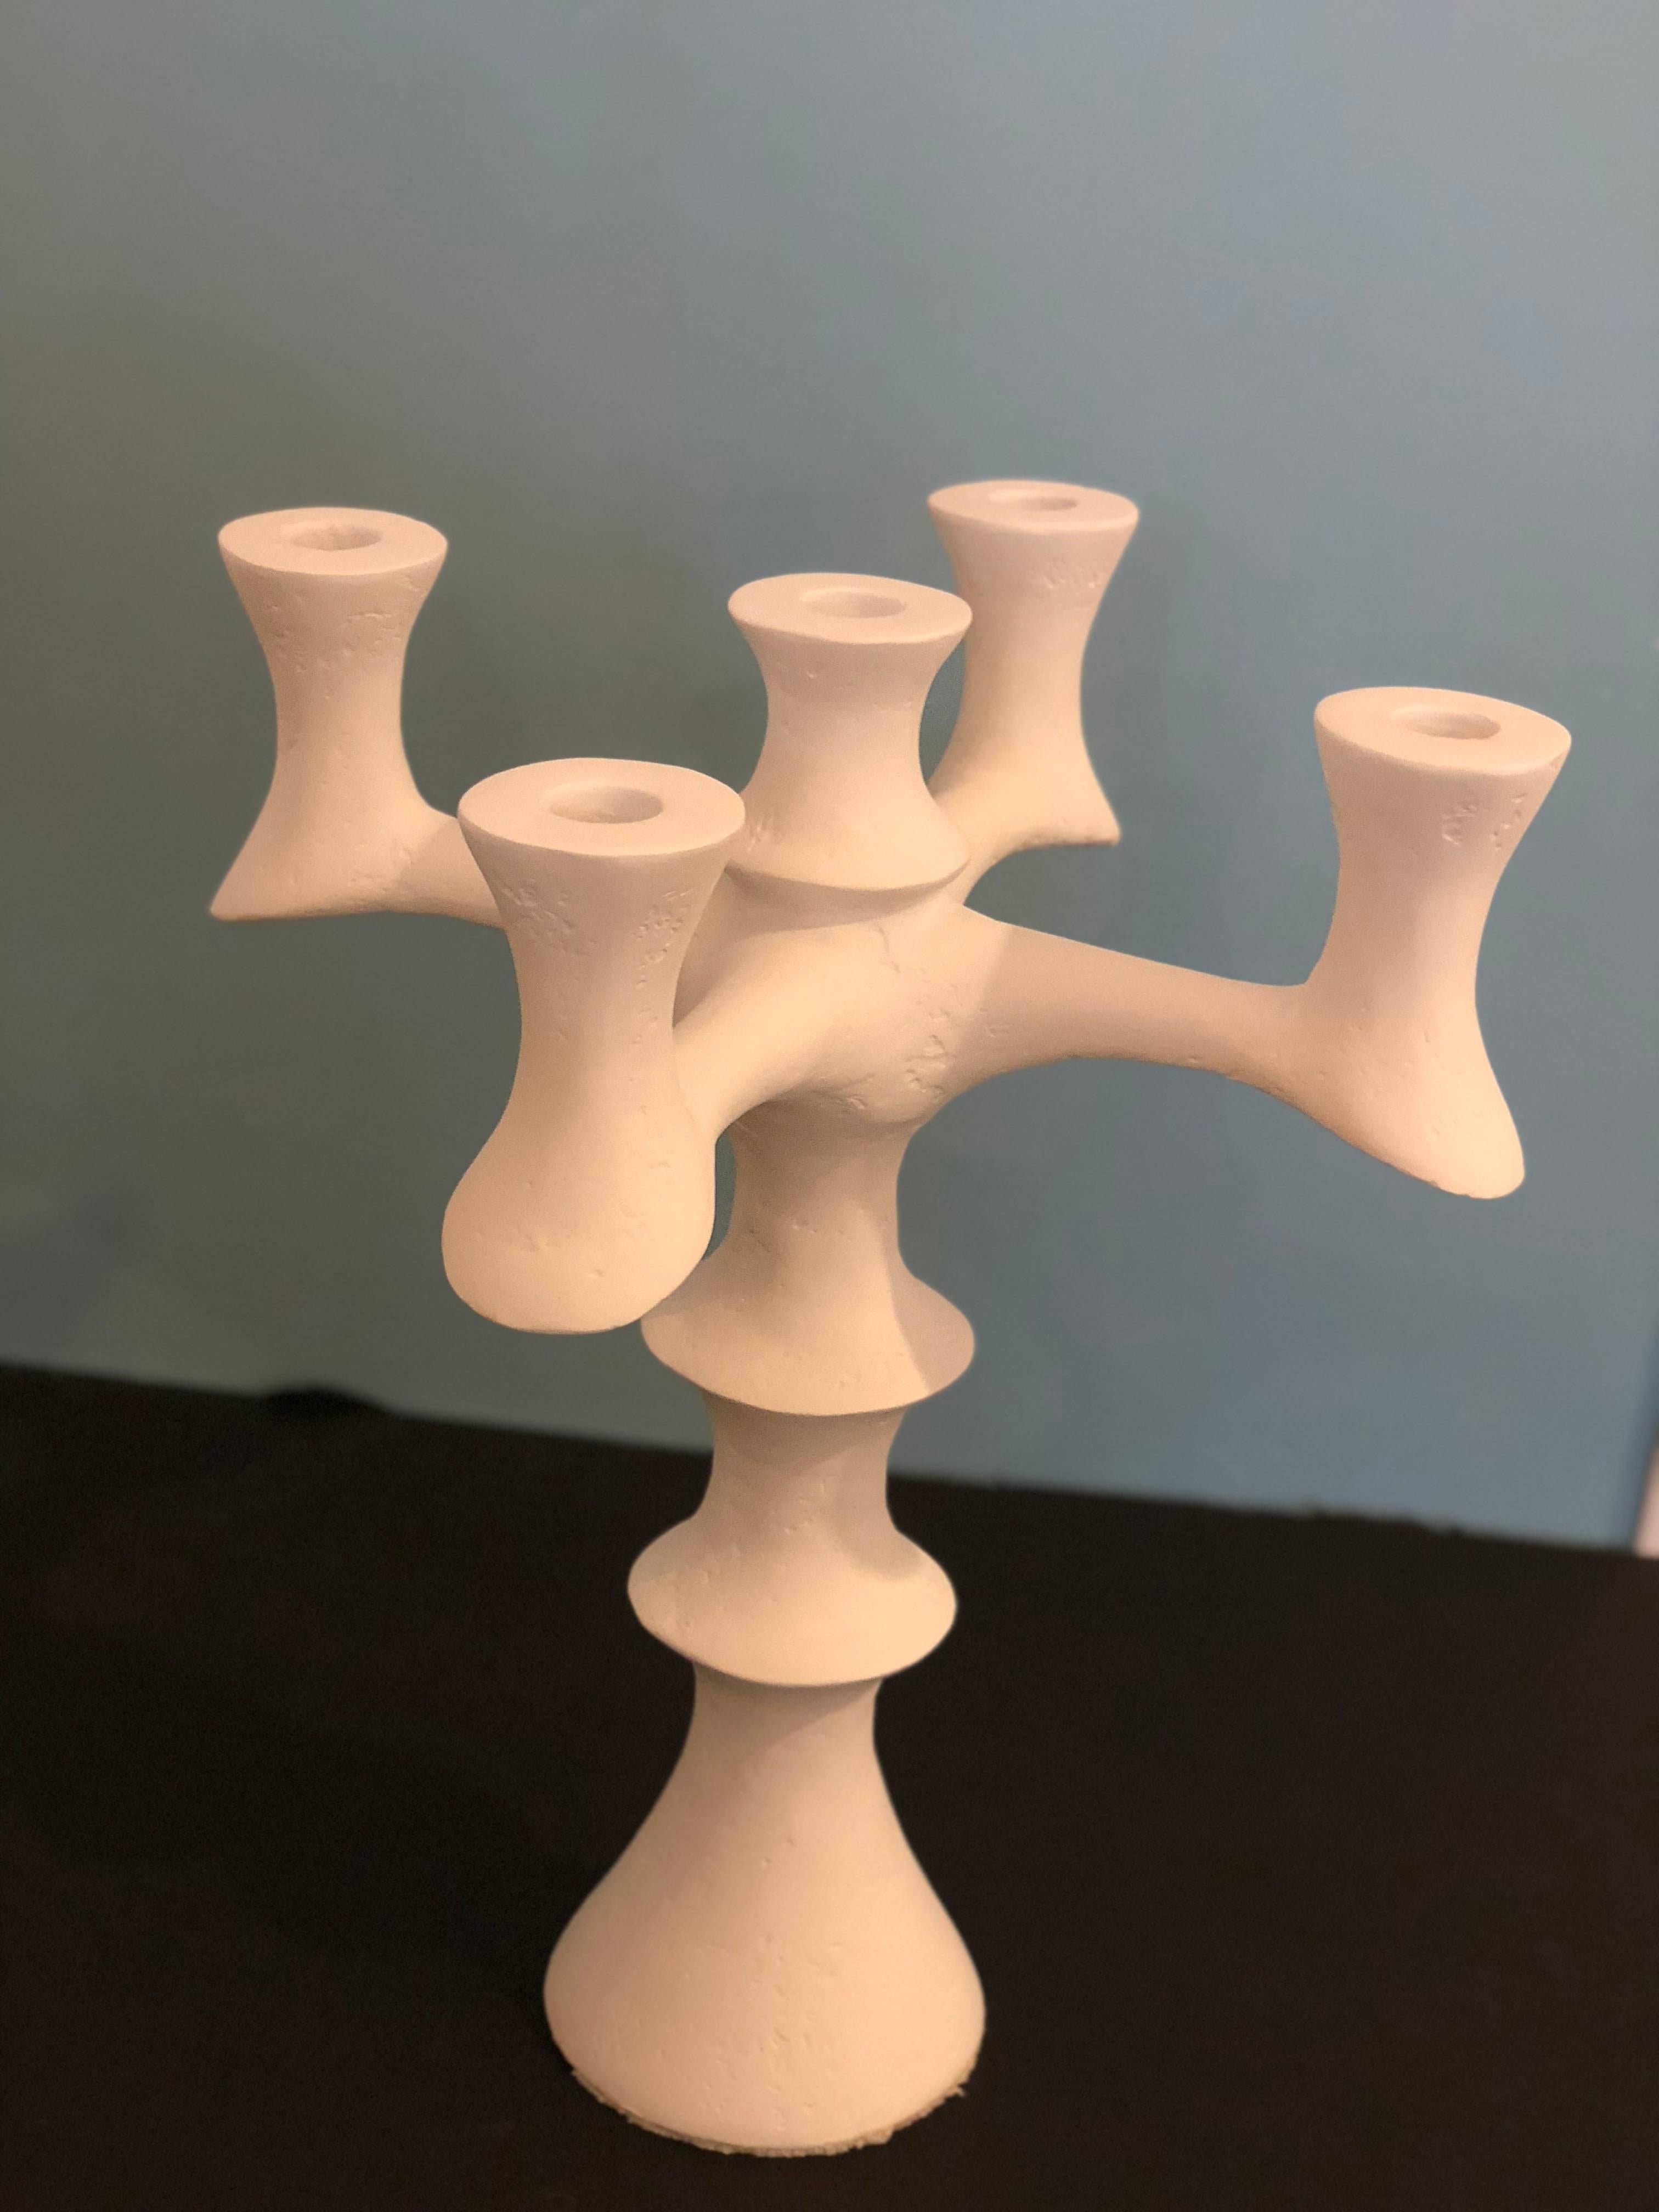 Sculpted plaster of Paris candleholder. A reminiscent of Giacometti's work, this five candleholder has a sleek yet elegant design. With its soft edges and texture it makes for an outstanding centrepiece for any console or table.